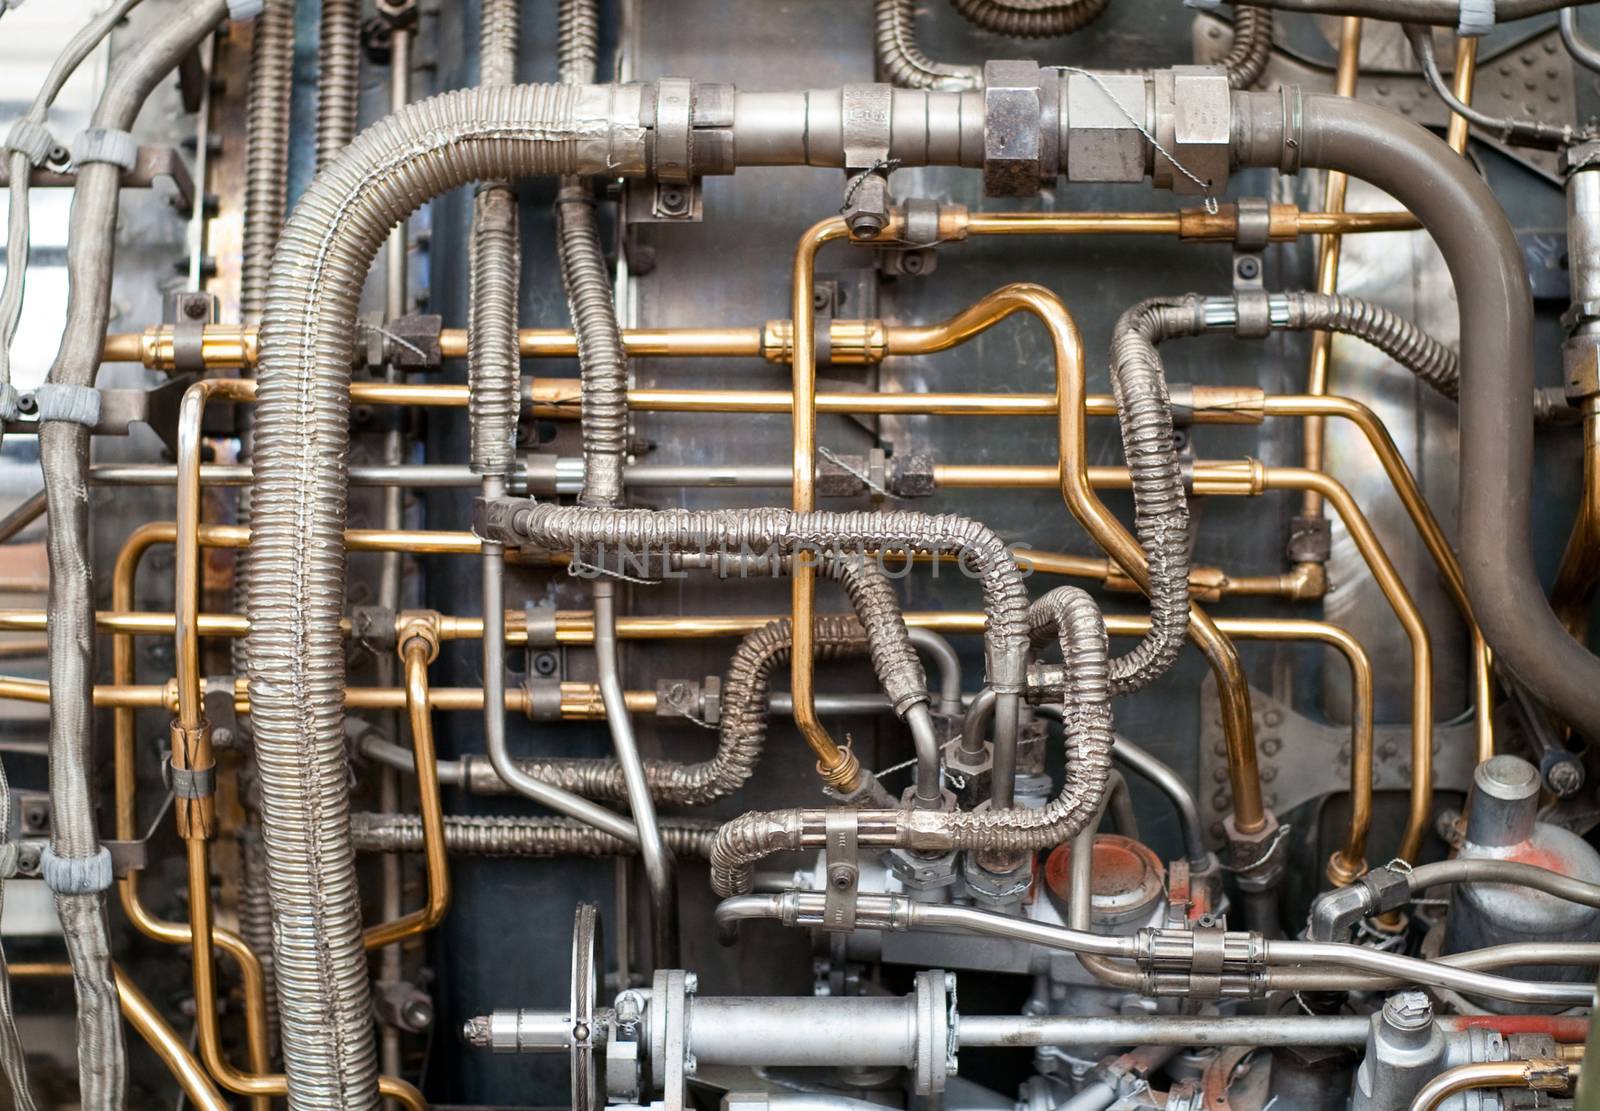 Rocketside Jumble of Hoses Hydraulic Lines Side of Rocket by ChrisBoswell